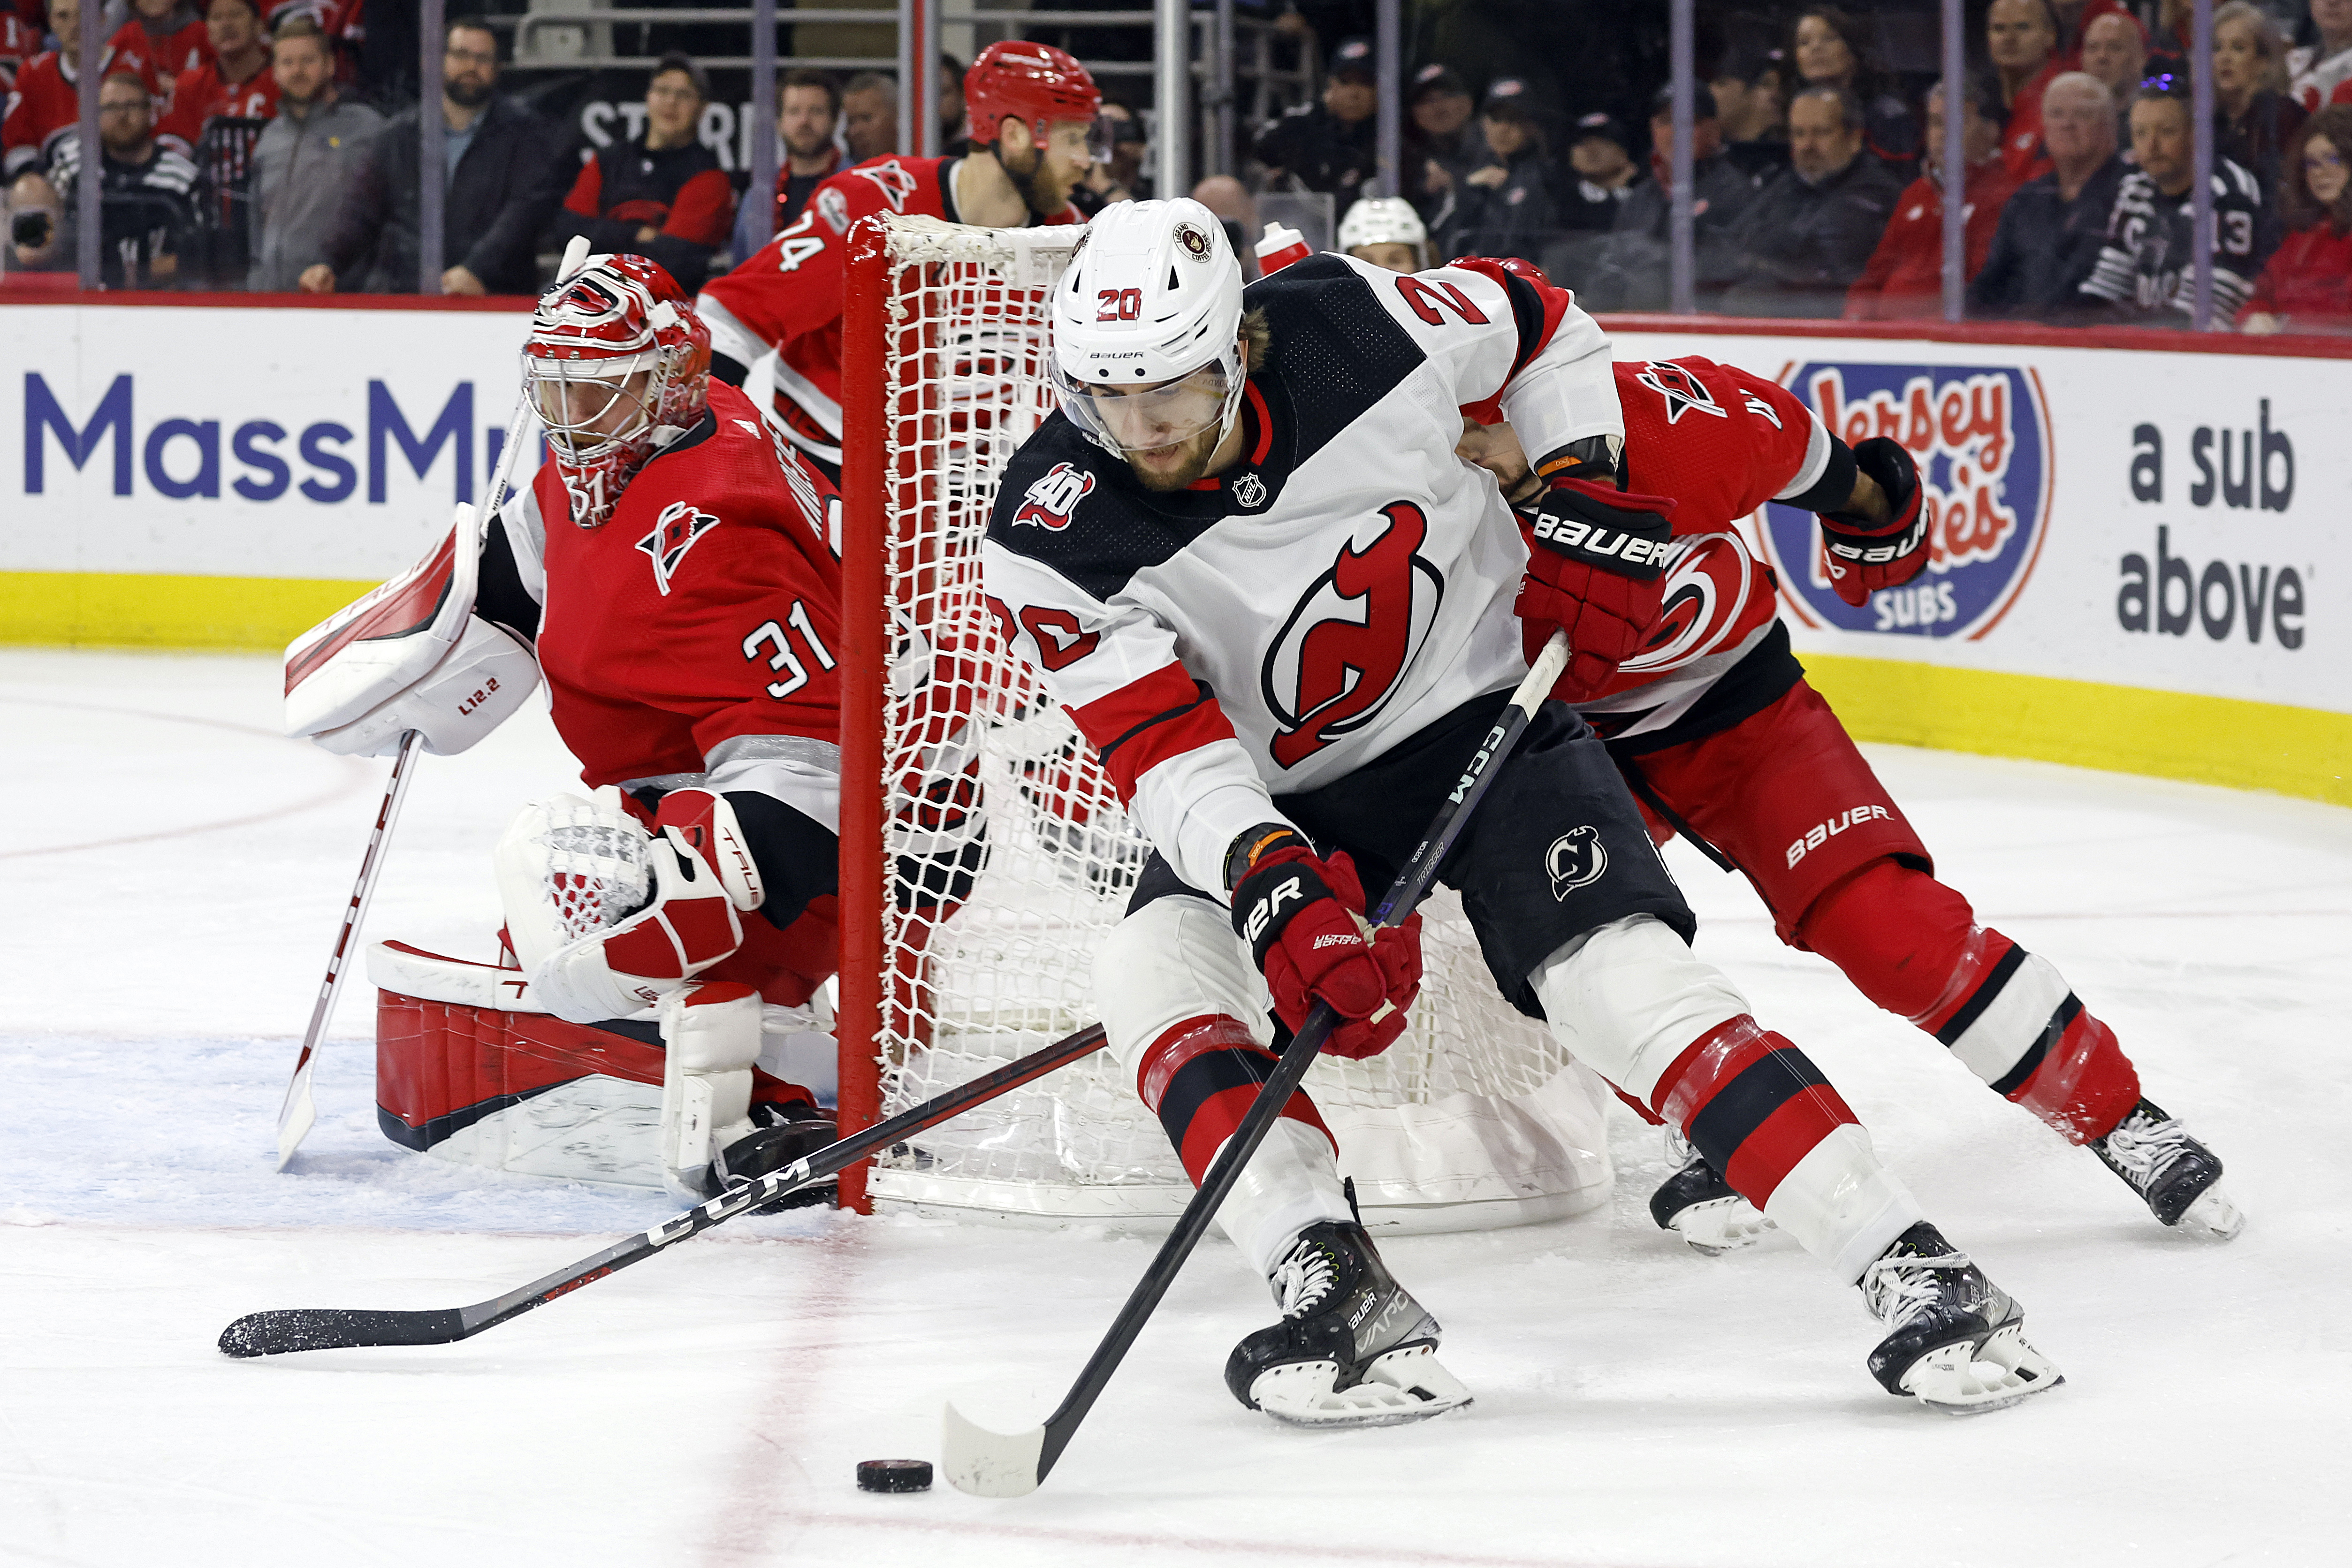 New Jersey Devils at Carolina Hurricanes Game 2 Free live stream, TV channel, odds (5/5/23)